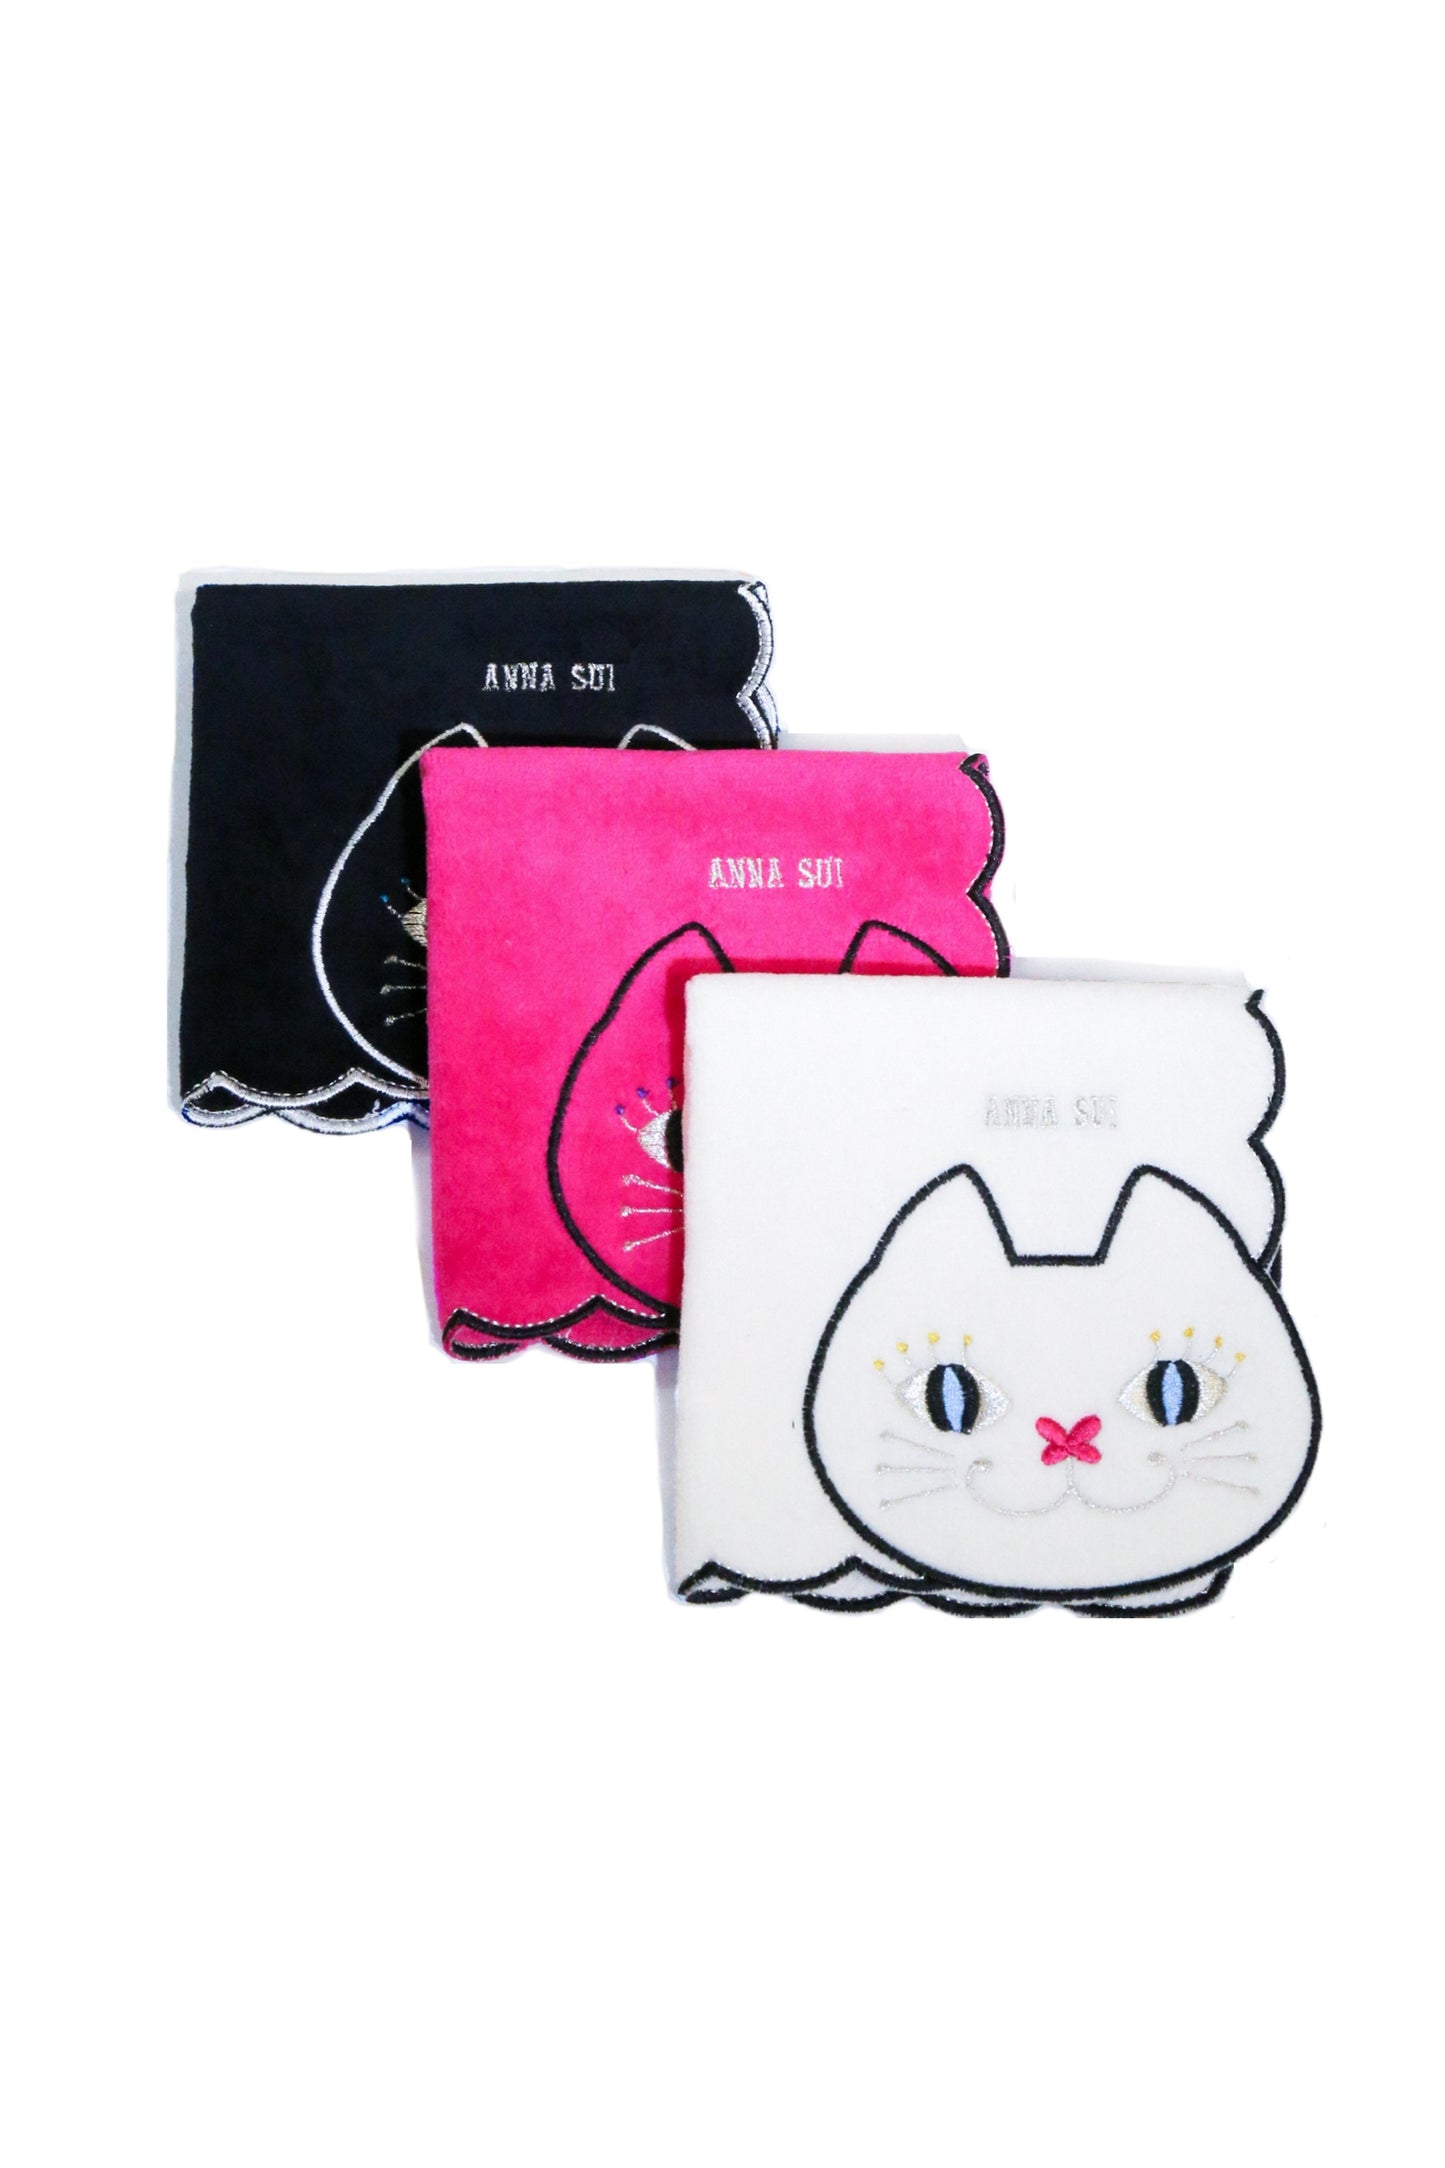 Pack of 3 Washcloth squared, wavy hems, in black, red, white, cat with white borders, Anna Sui label